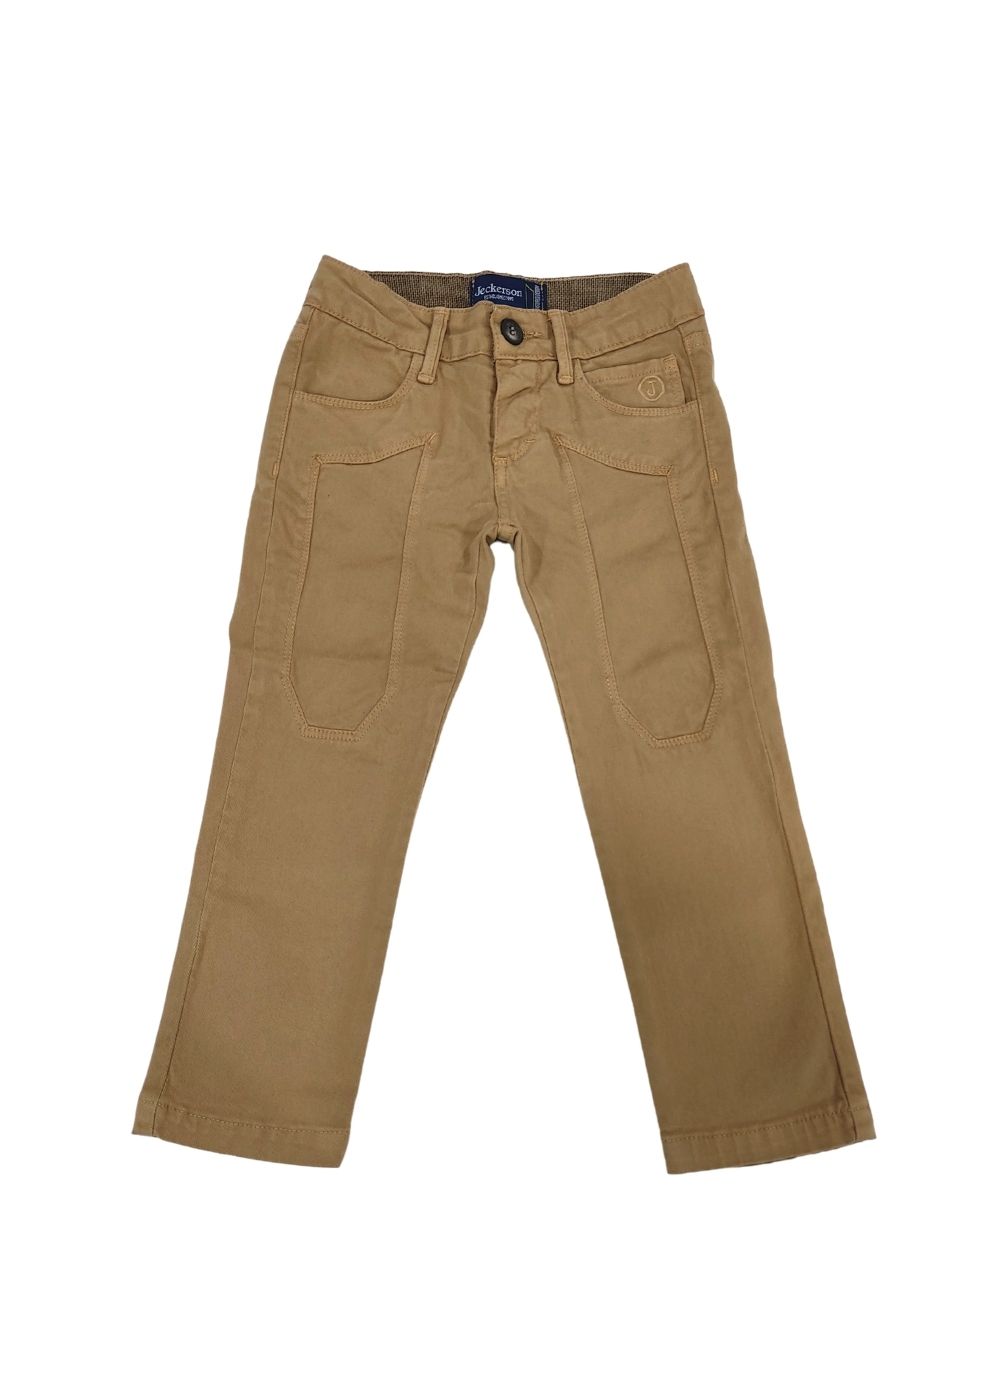 Featured image for “JECKERSON PANTALONE BEIGE”